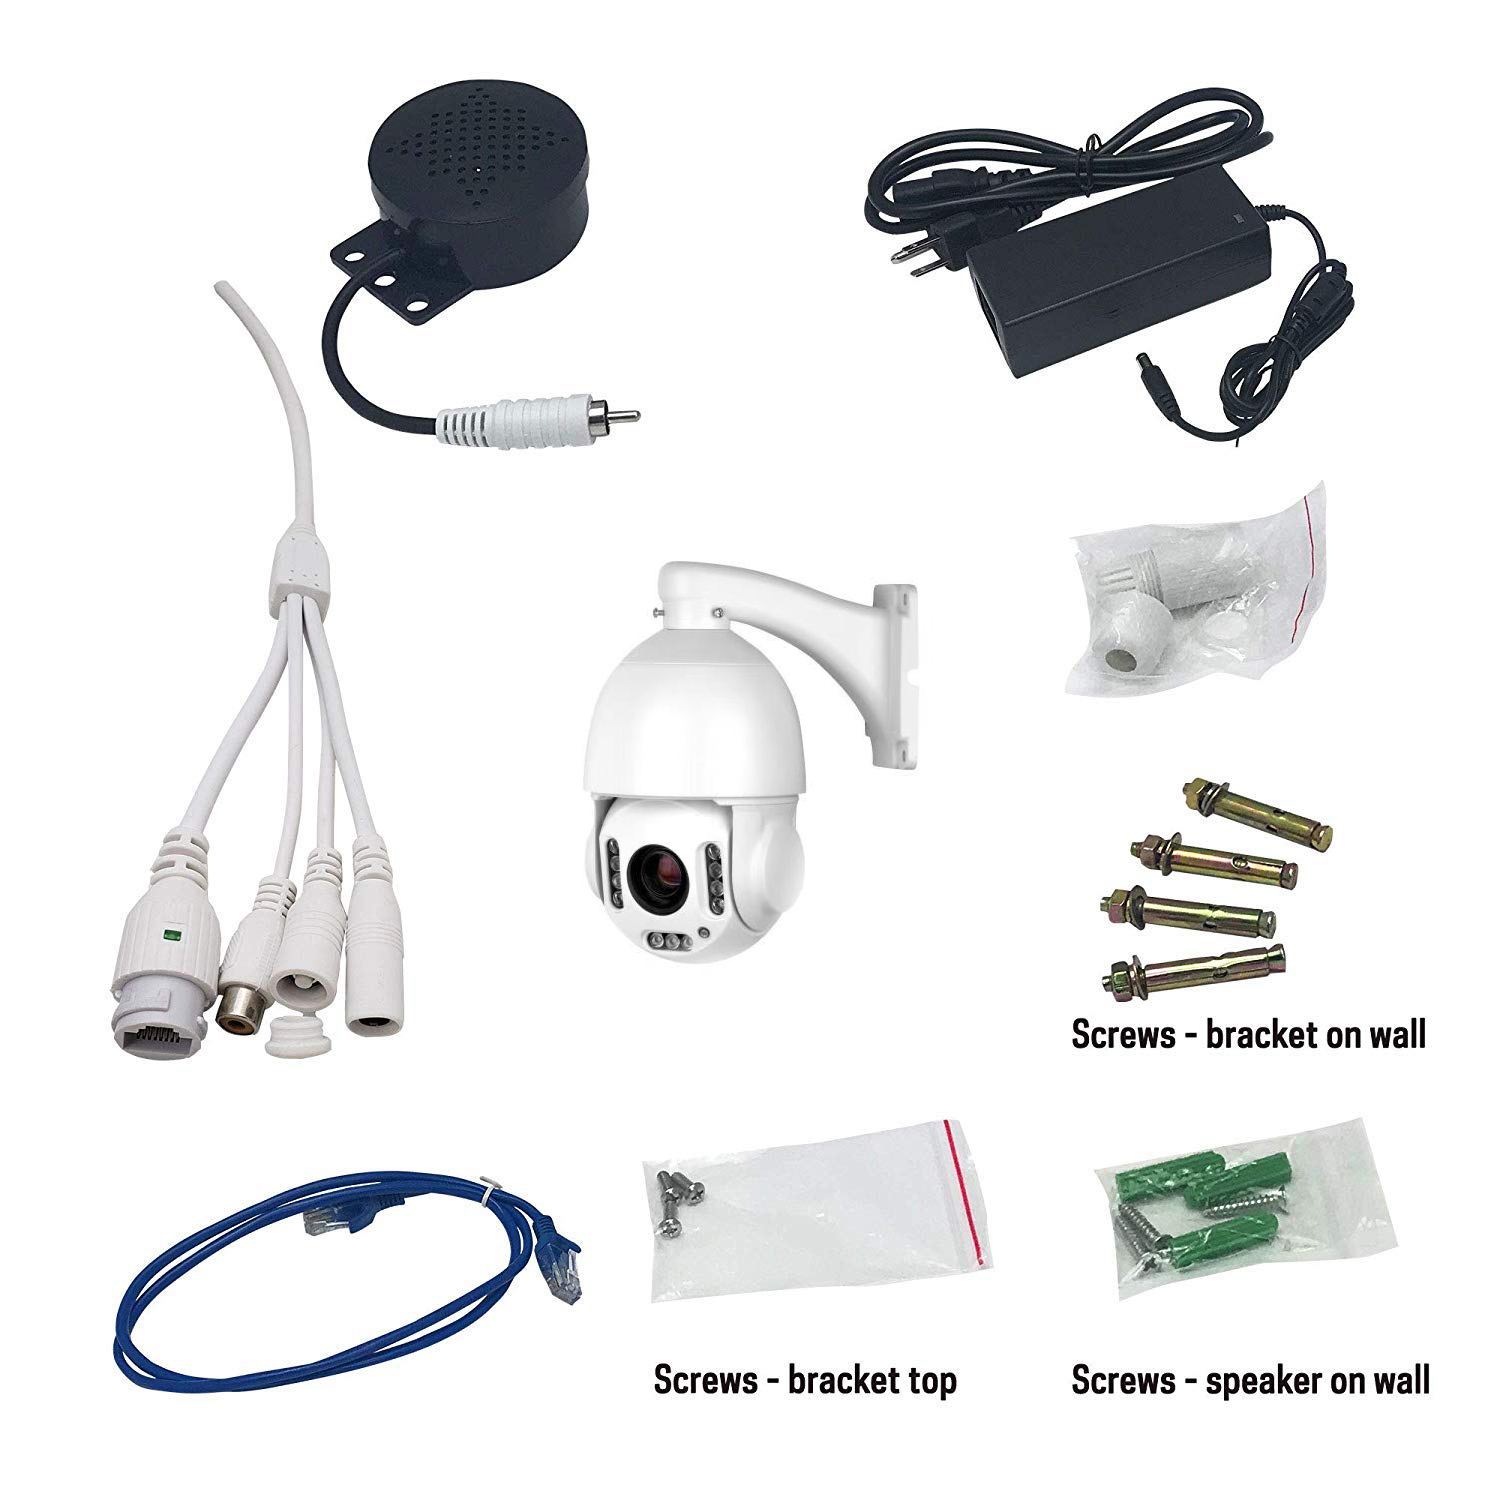 Microseven Professional Open Source, Remote Managed, 5MP (2560x1920) UltraHD PoE+ 20X Optical Zoom Pan Tilt Speed Dome IP Camera, Smart Motion Detection & Auto Tracking, Indoor / Outdoor PTZ Camera, Spotlights Smart Color Night Vision 256GB SD Slot,Day & Night,Sony Starvis CMOS,IP66 Weatherproof, Two-Way Audio with Build-in Microphone & External Speaker (Included), Auto Cruise,ONVIF, Web GUI & Apps, CMS (Camera Management System), Cloud Storage + Broadcasting on YouTube and Microseven